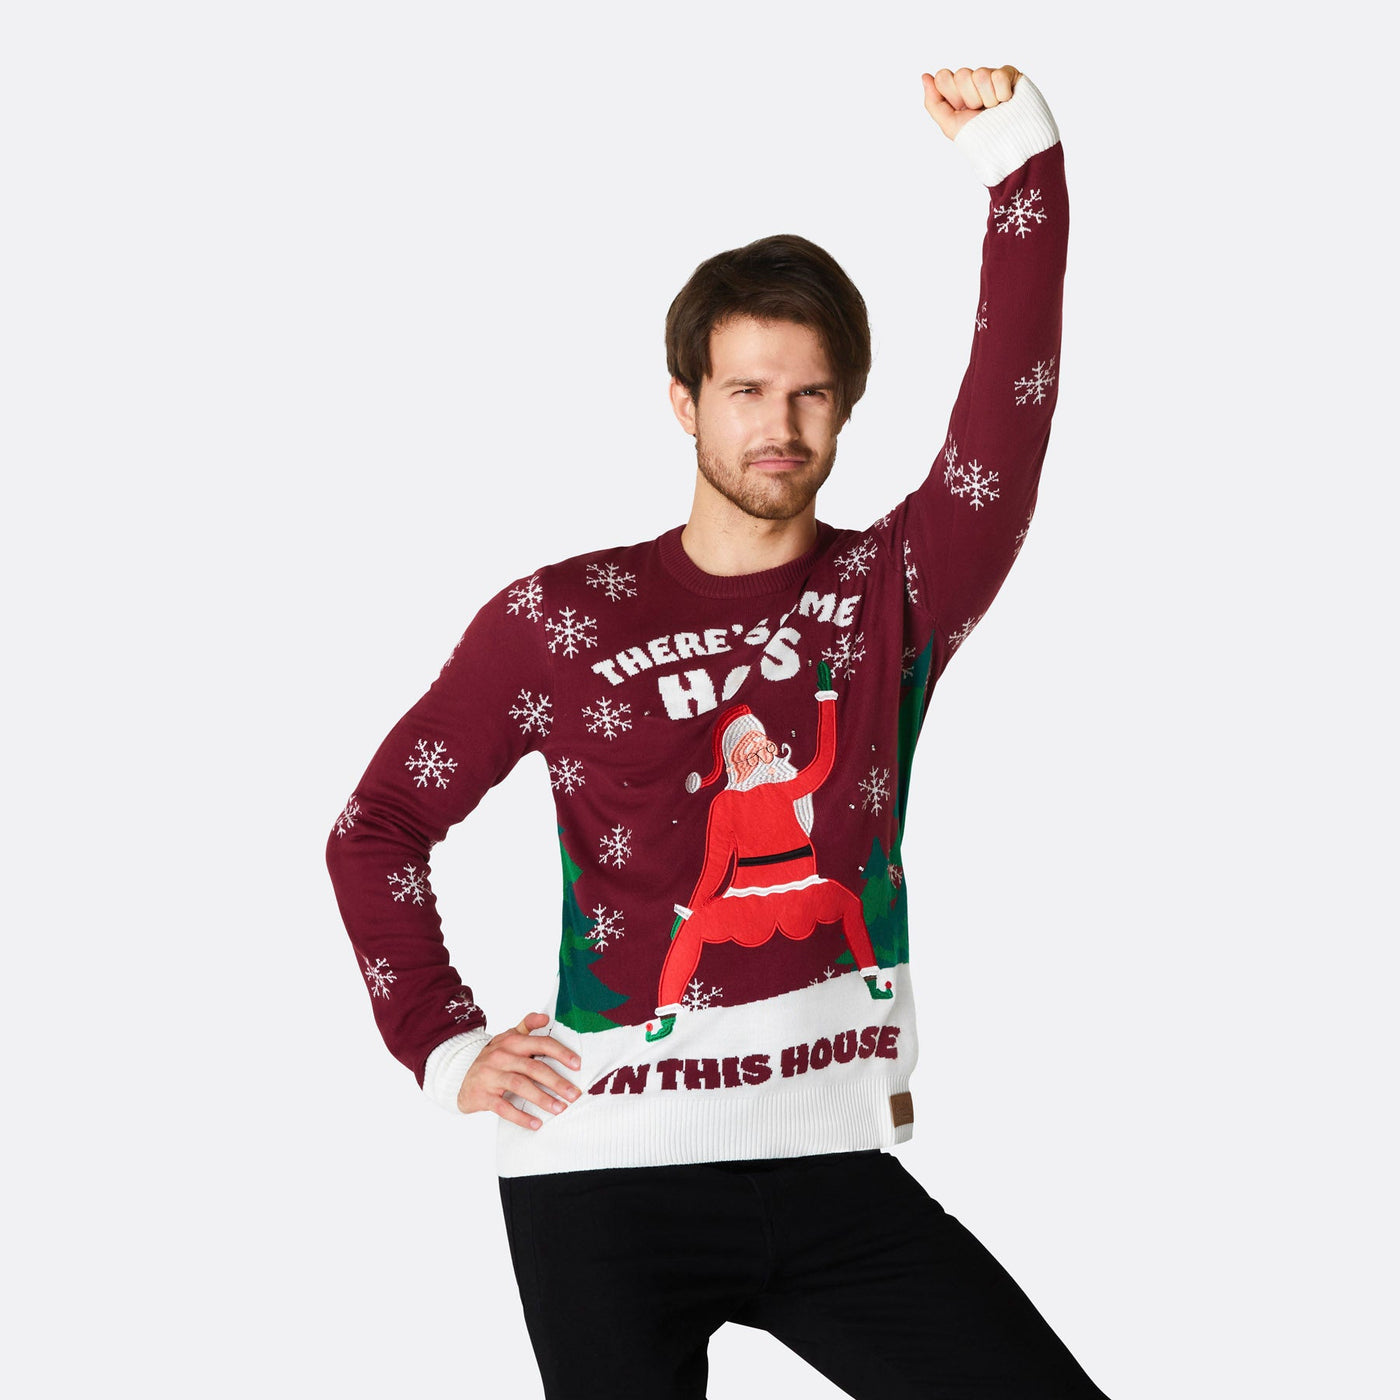 Men's Ho's in This House Christmas Sweater